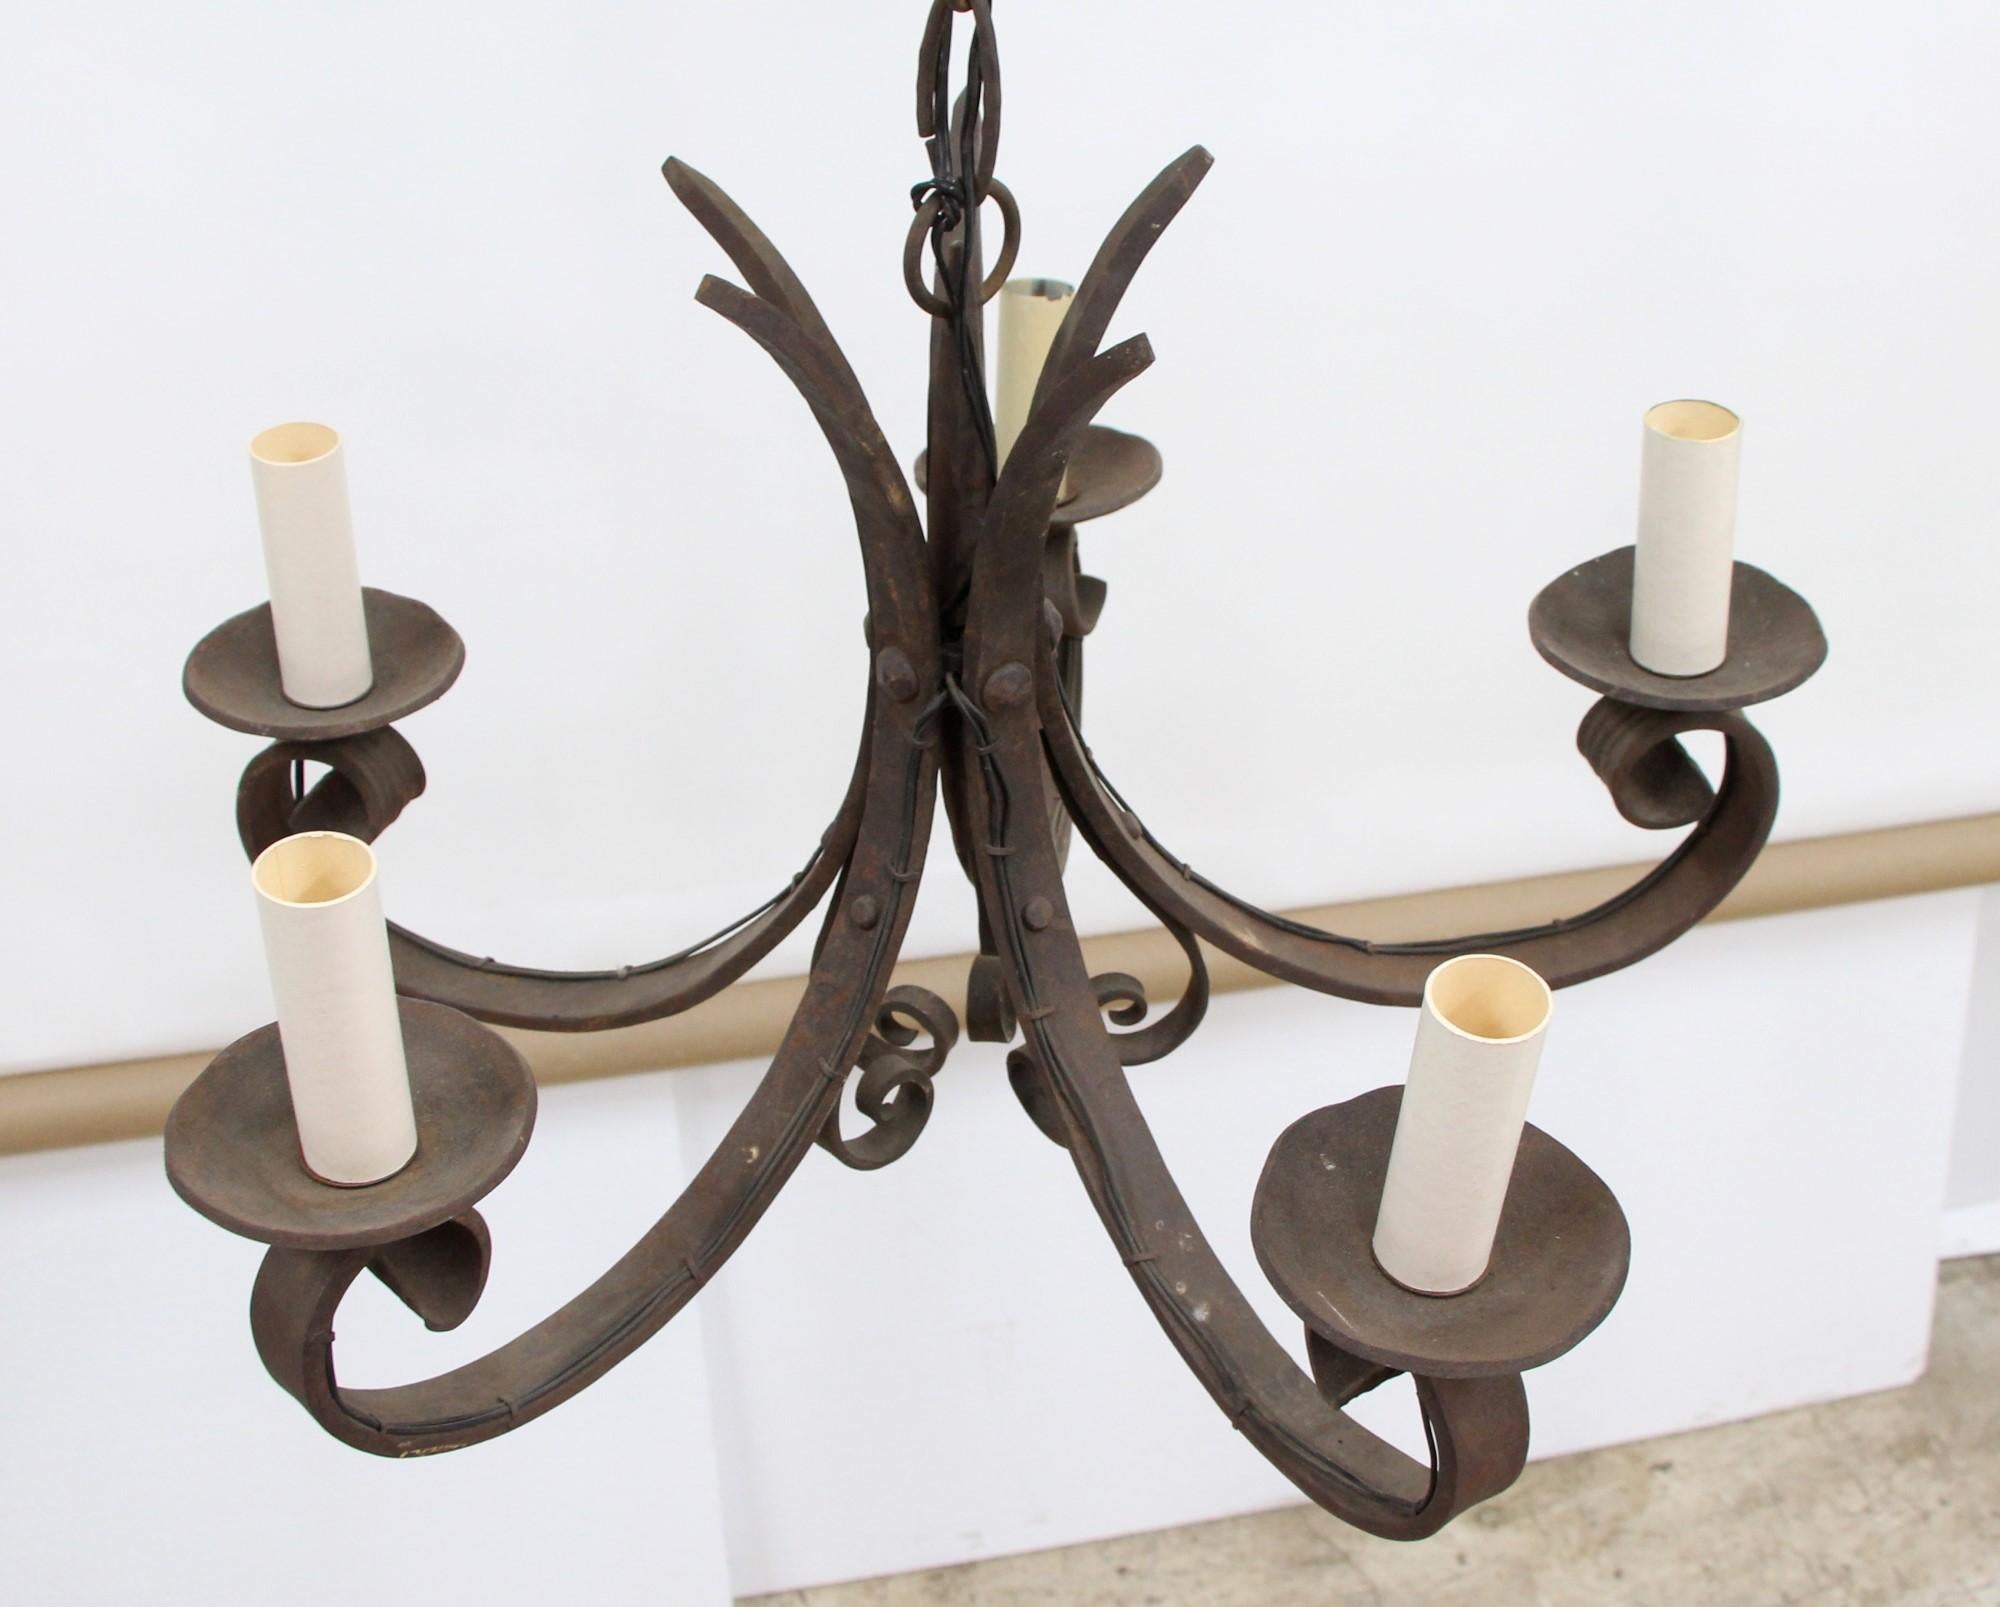 French Provincial 1900s Country French Wrought Iron Black Chandelier w/ Five Candlestick Arms